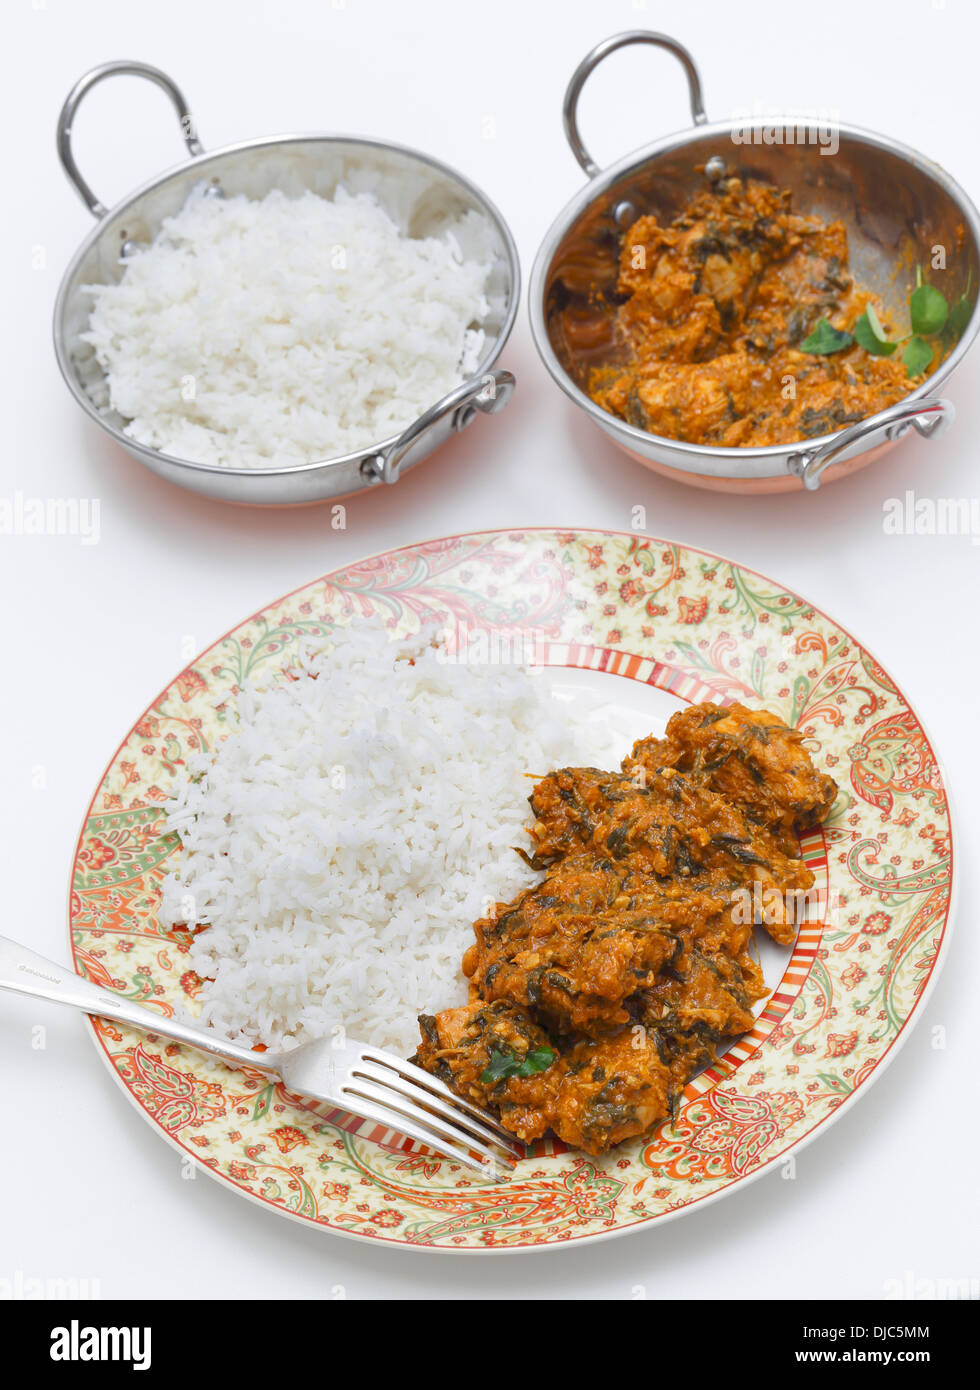 Methi murgh - chicken cooked with fresh fenugreek leaves - served on a plate with rice Stock Photo